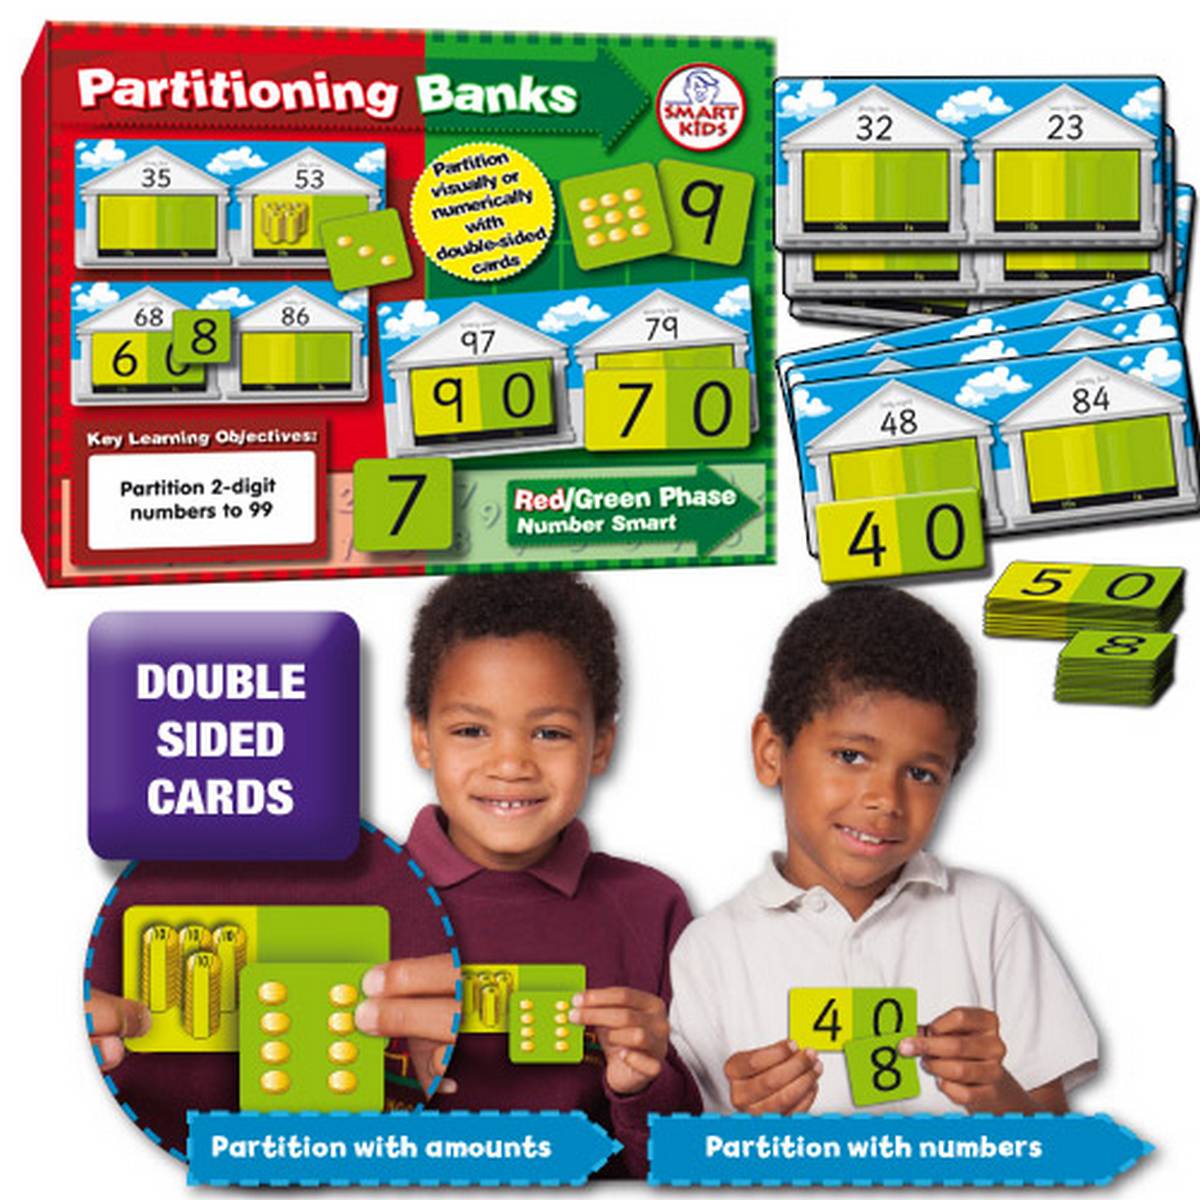 Partitioning Banks